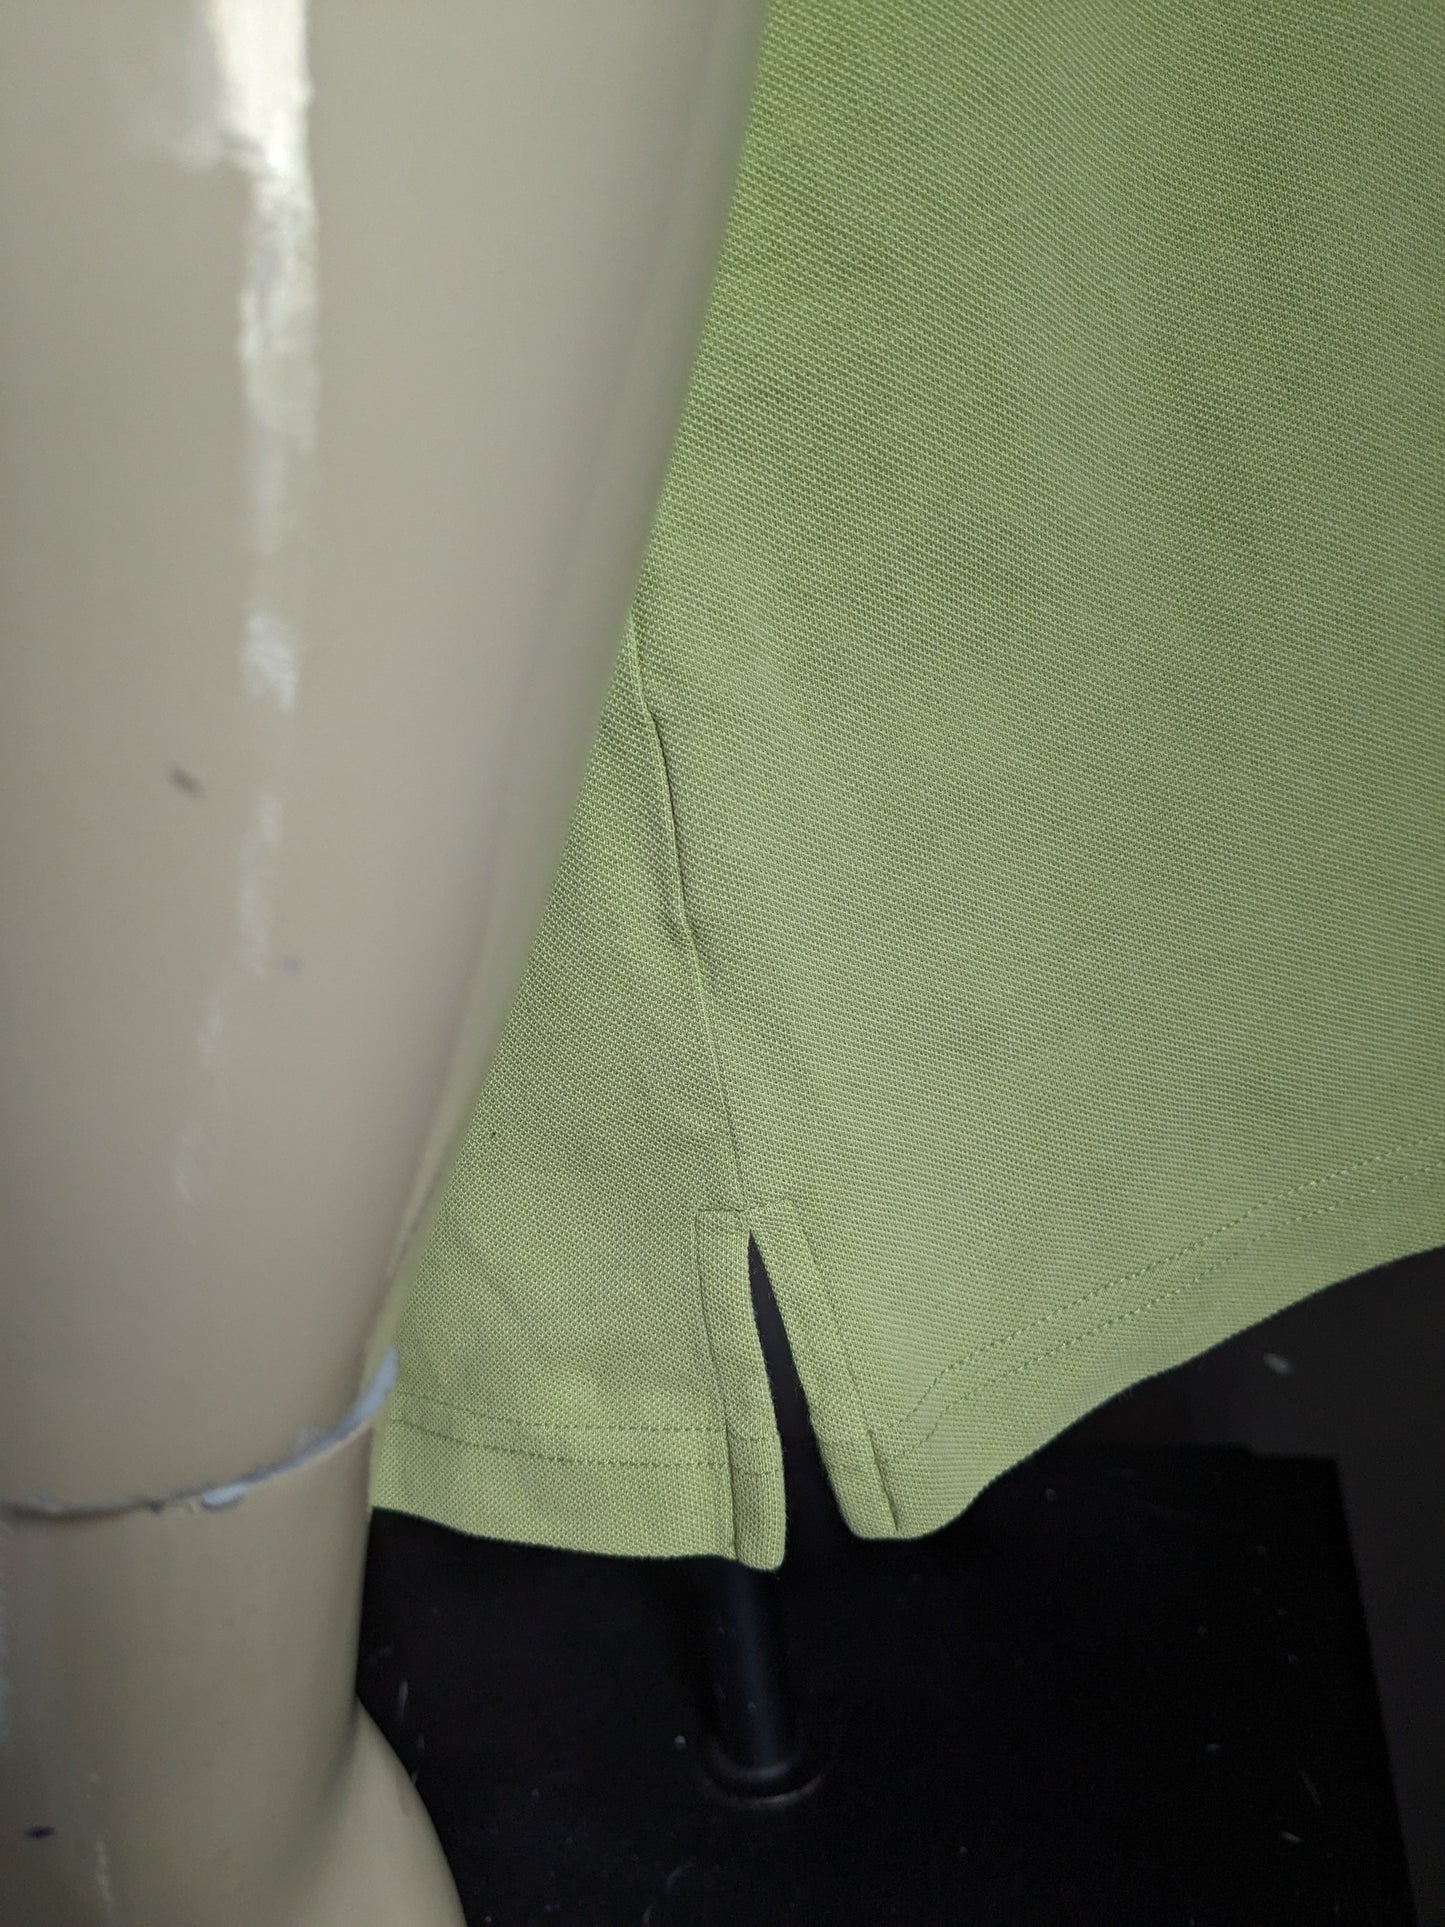 Vintage Harold Polo. Light green colored. Size XL.